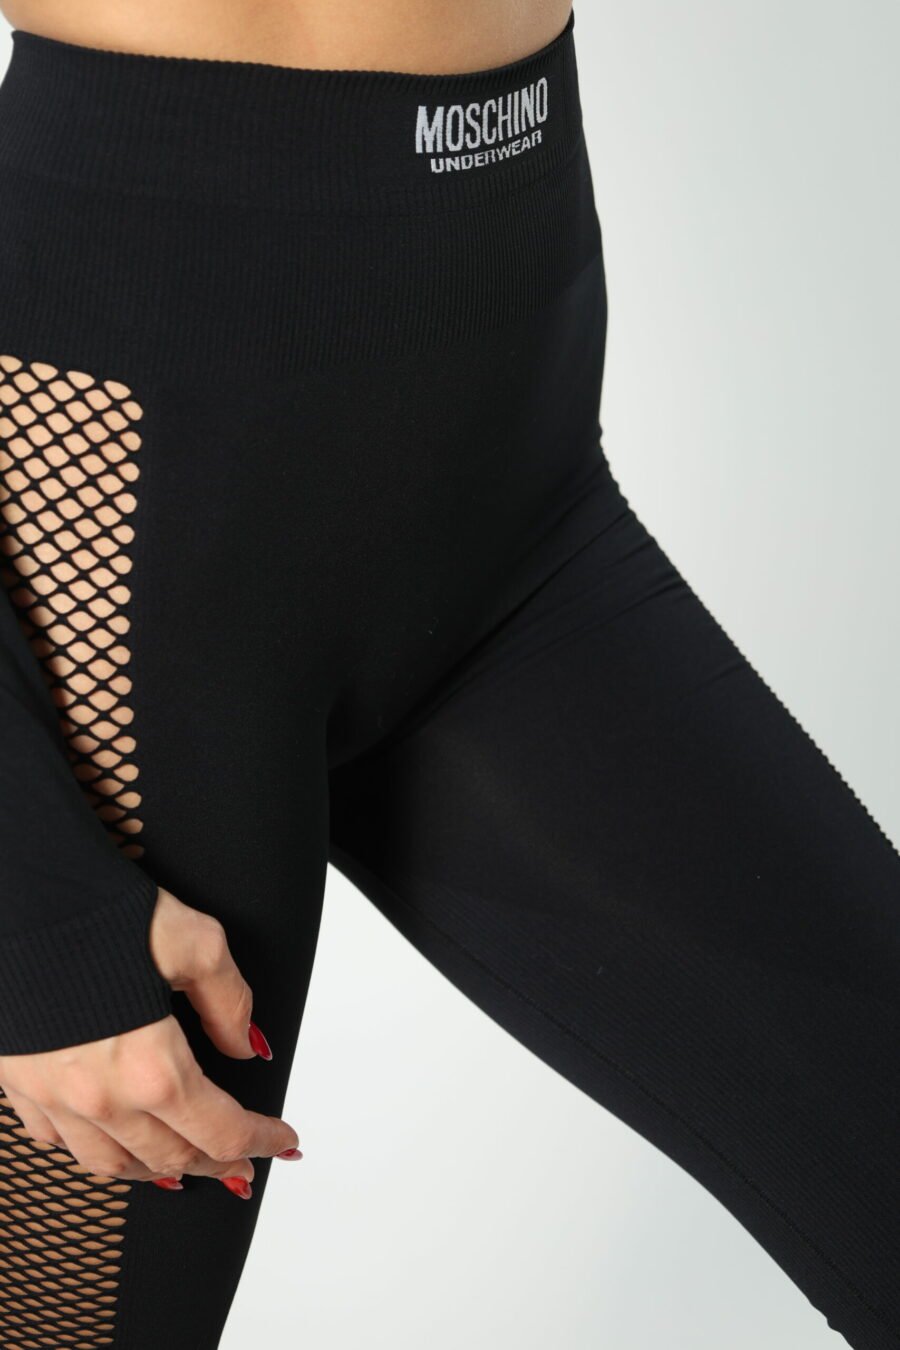 Black leggings with logo and side mesh - 8052865435499 496 scaled